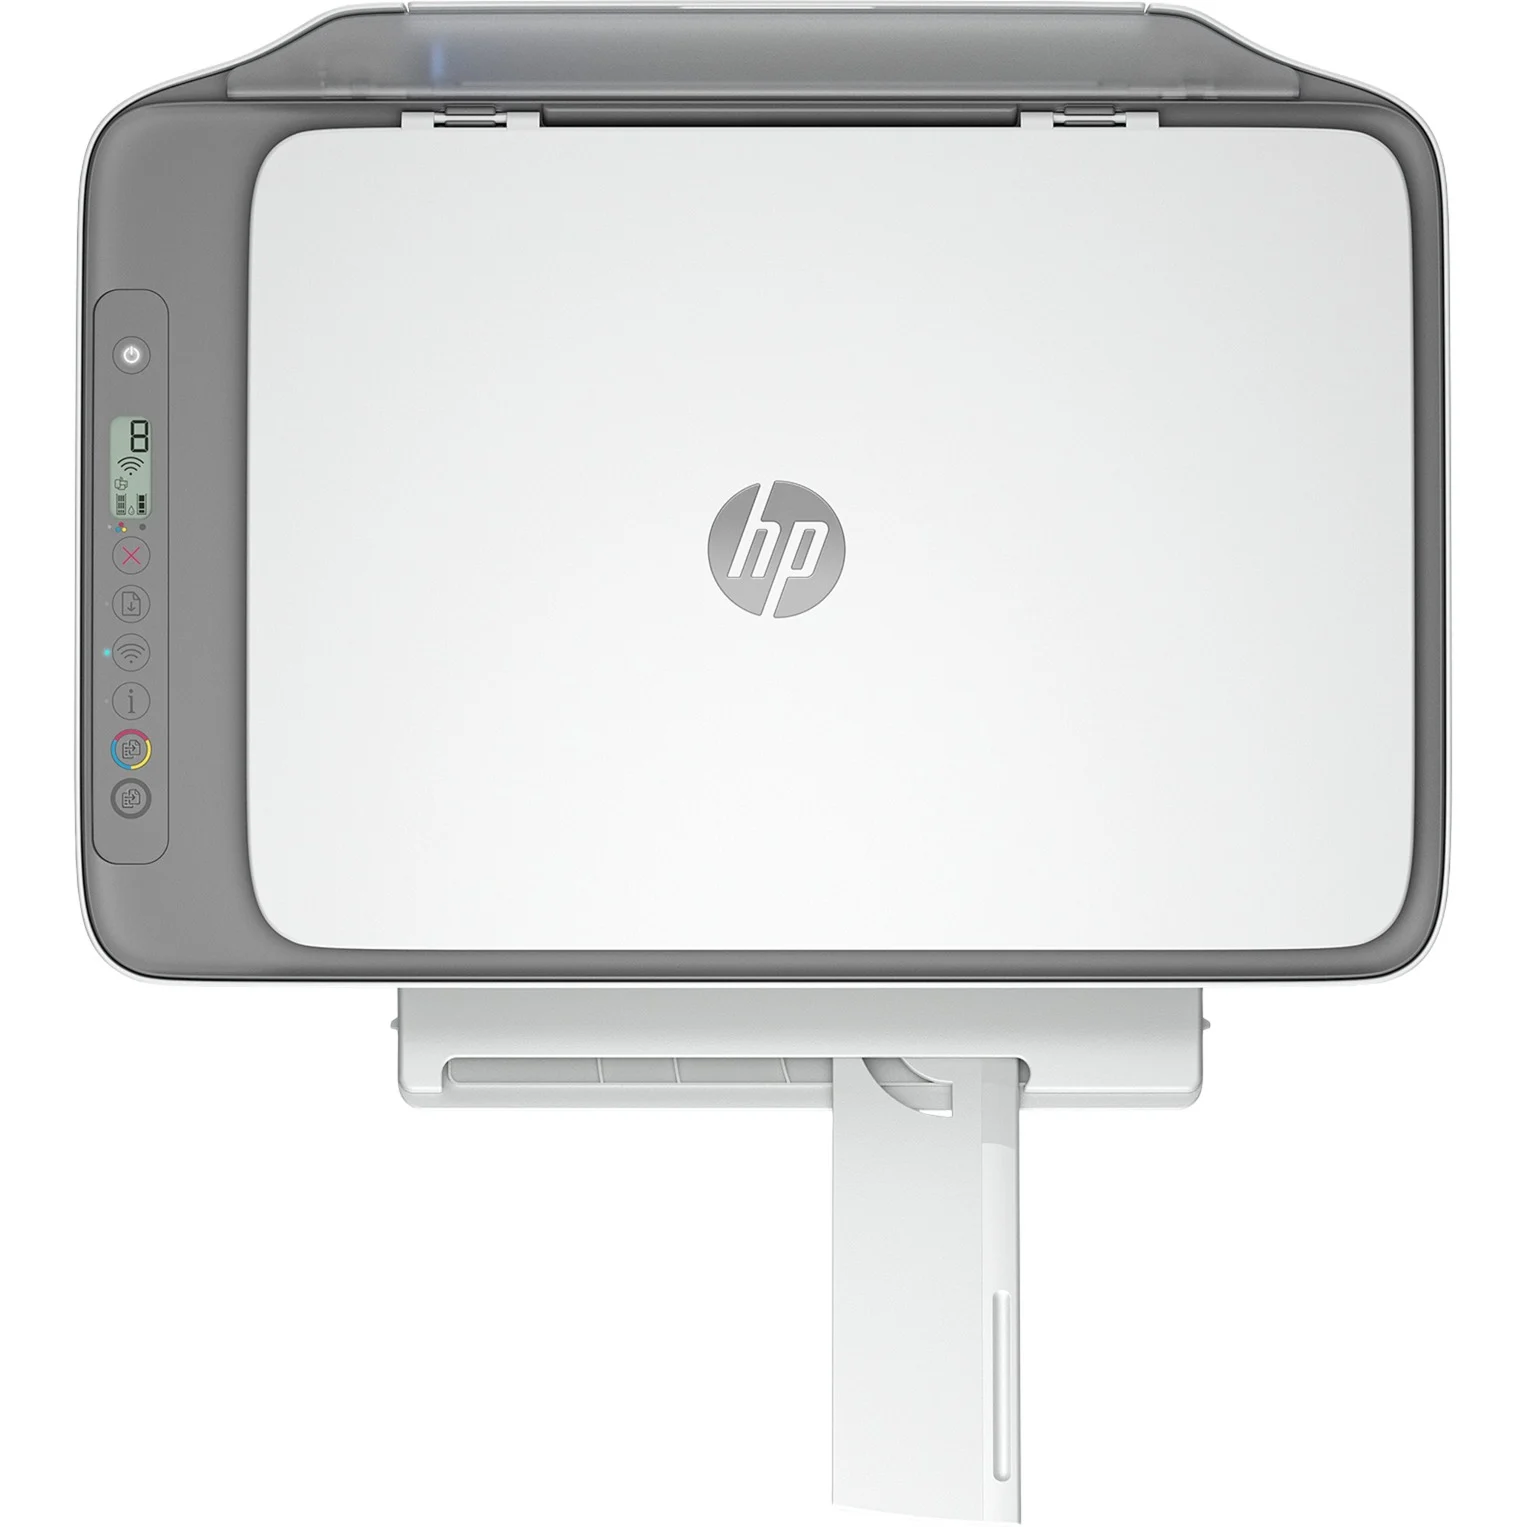 HP DeskJet 2820e All-in-One weiß, 3in1, Instant Ink, Tinte, mehrfarbig